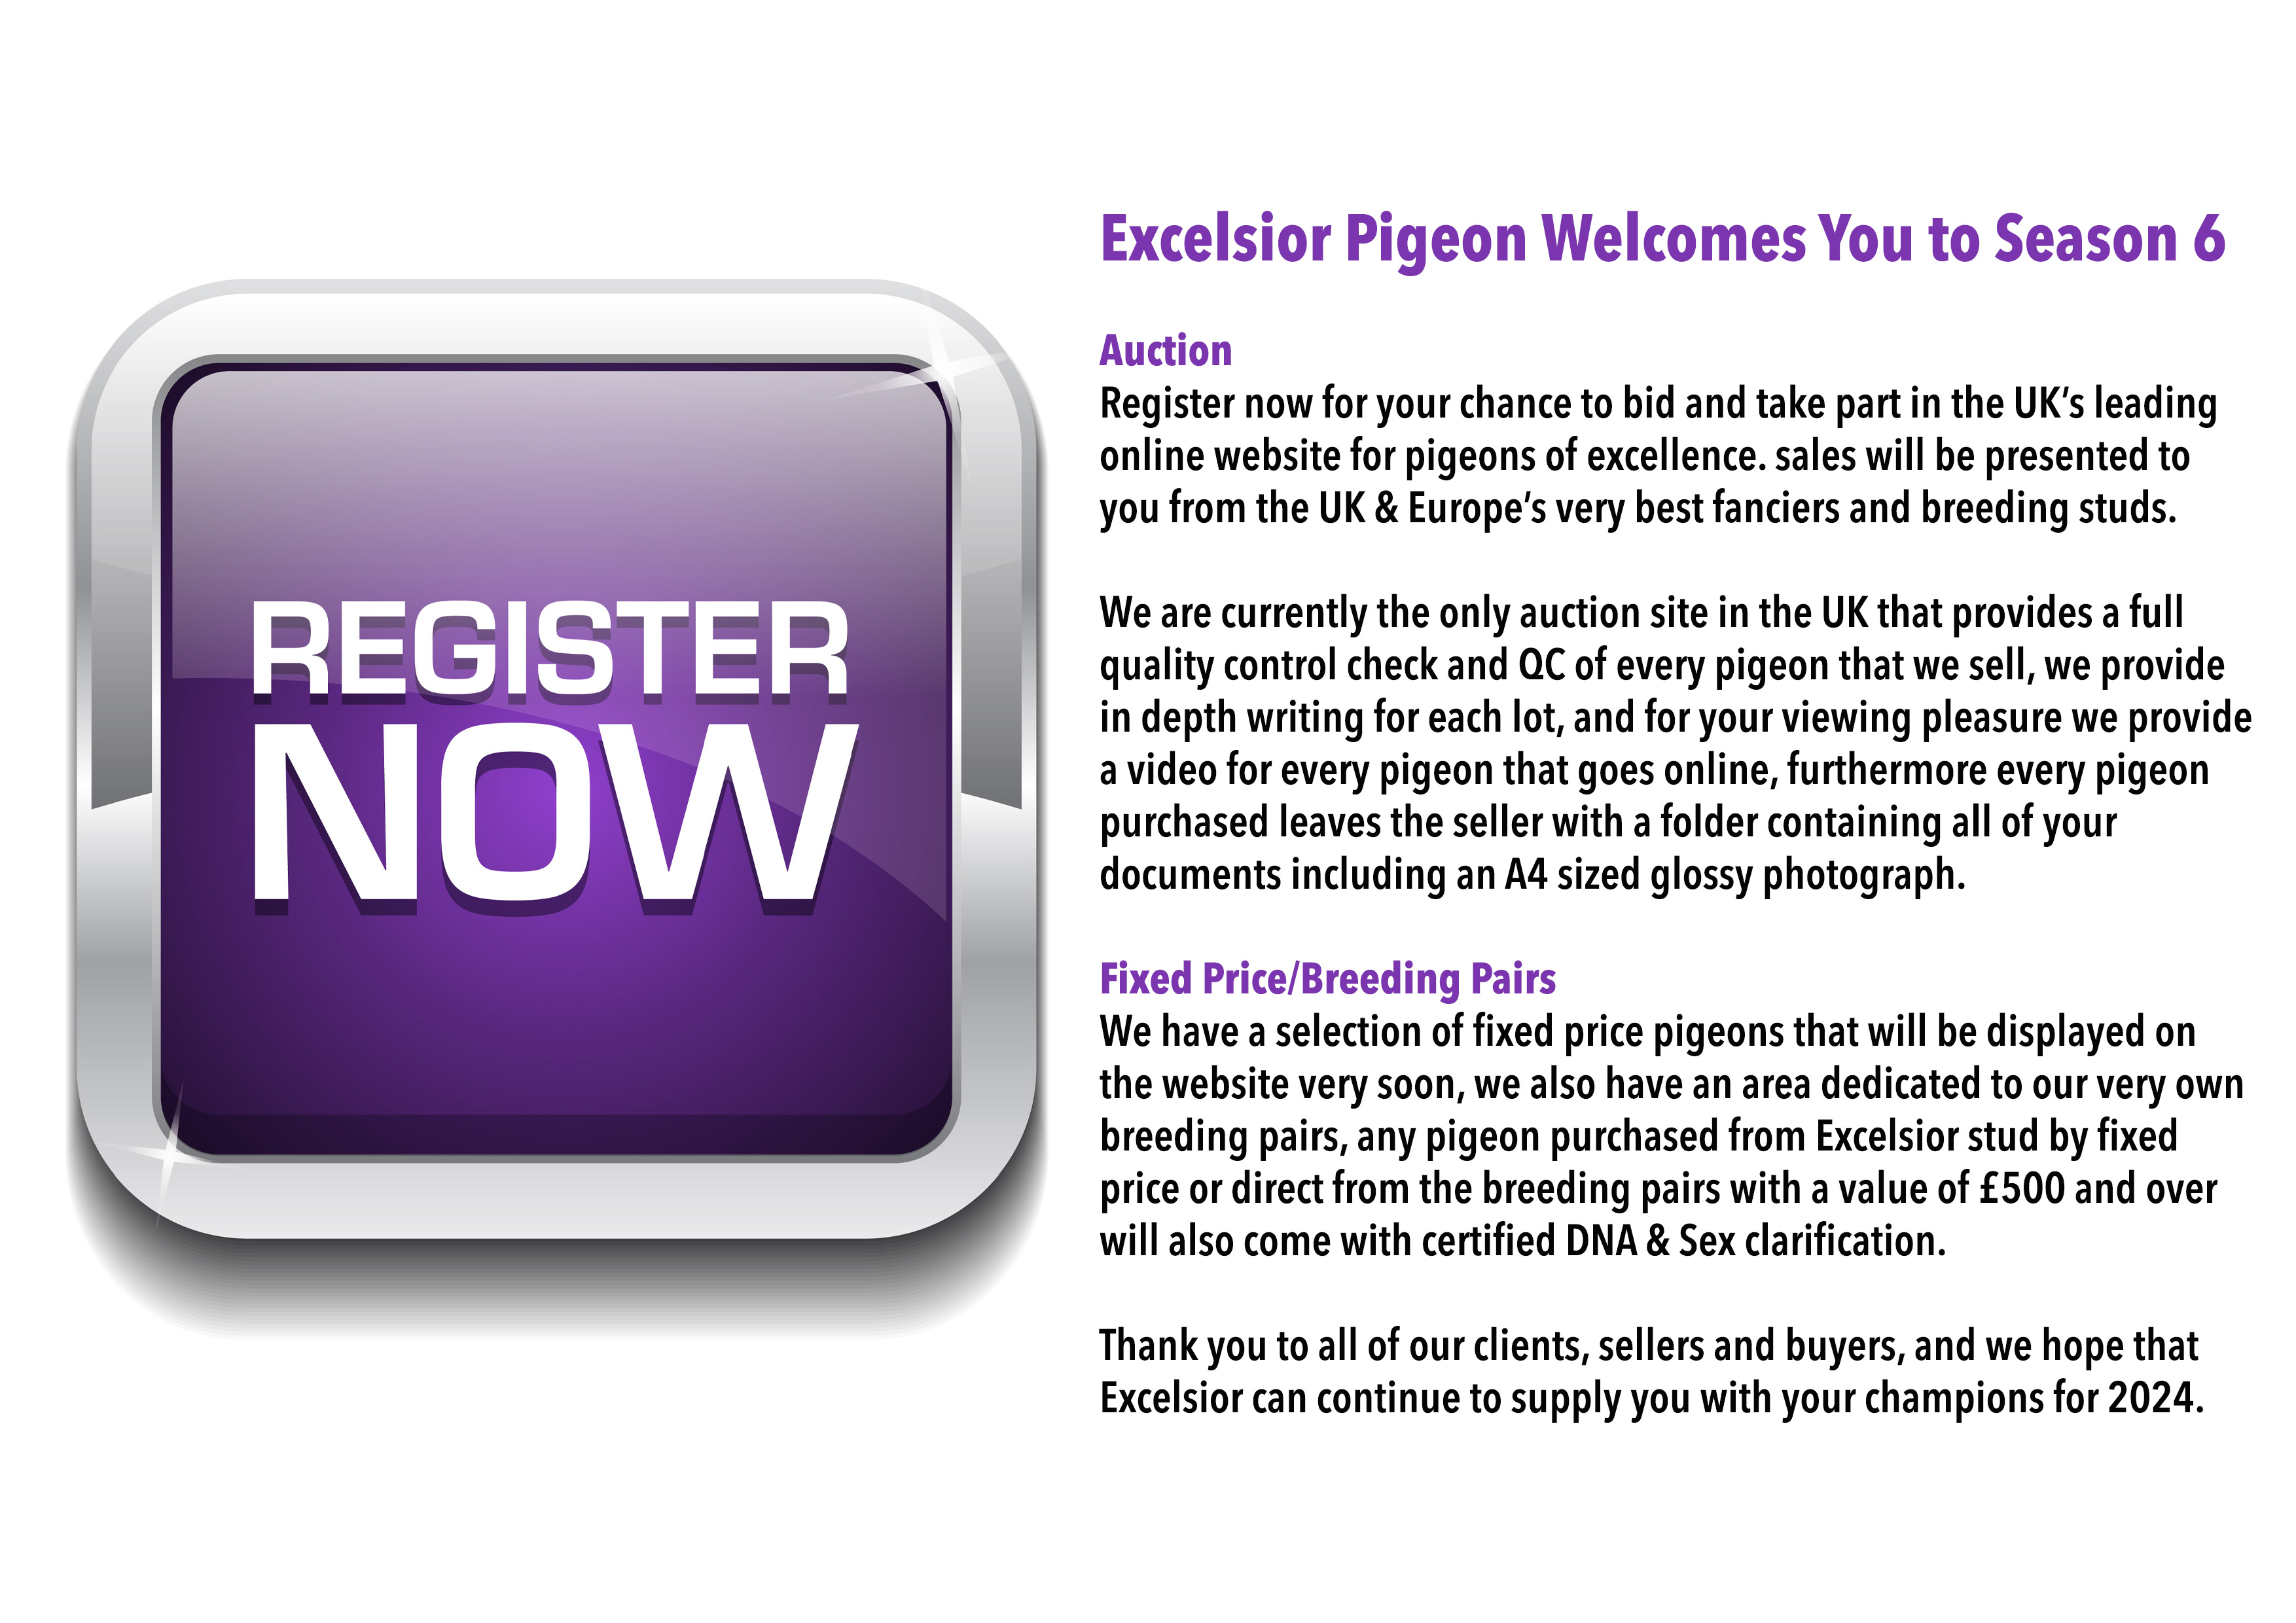 Excelsior Pigeon Welcomes You to Season 6 - Registering to bid